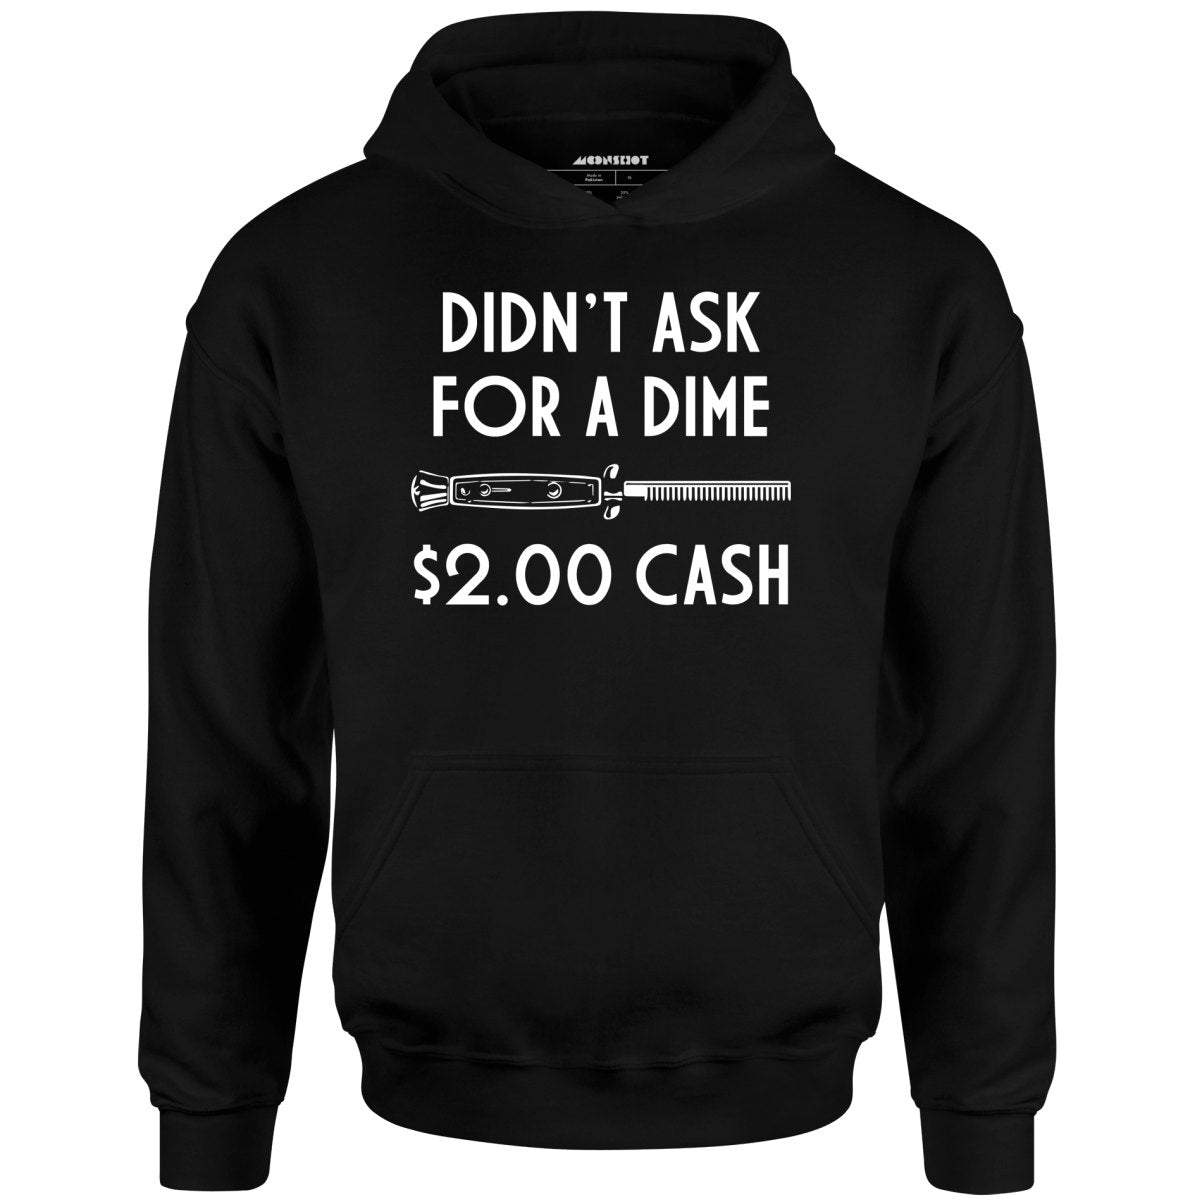 Didn't Ask For a Dime - Unisex Hoodie